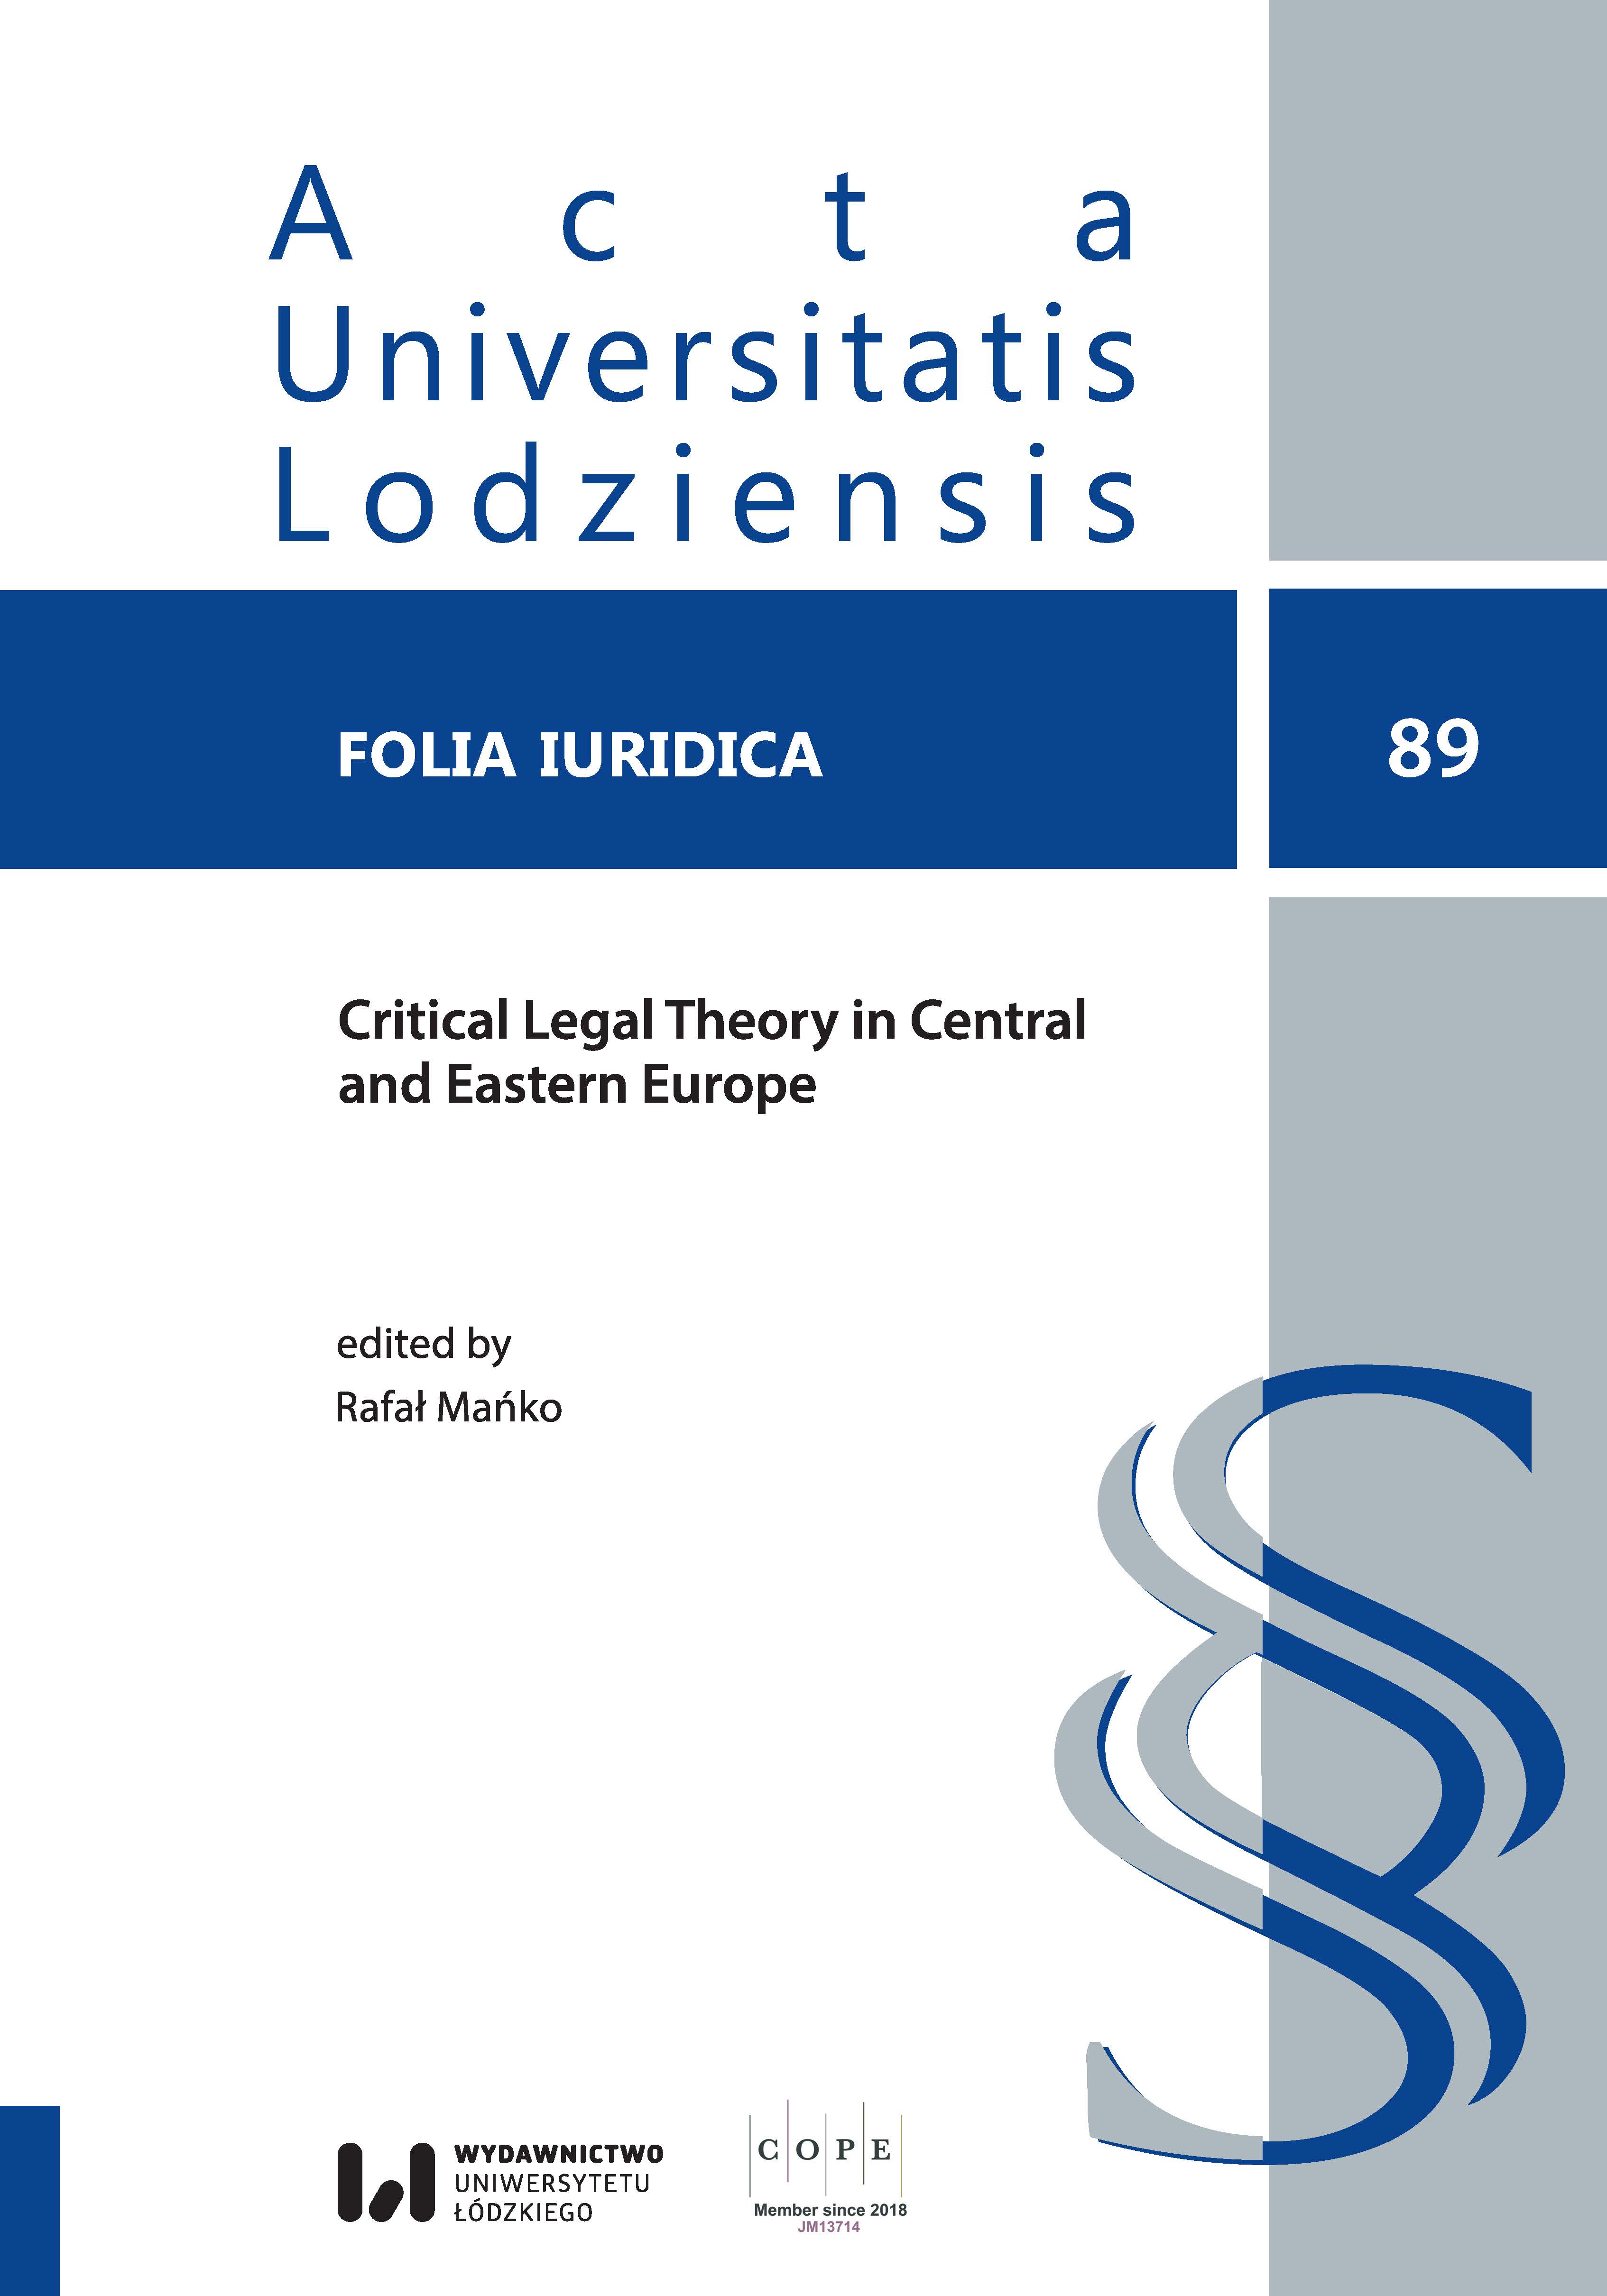 A New Popular Front, or, on the Role of Critical Jurisprudence under Neo-Authoritarianism in Central-Eastern Europe Cover Image